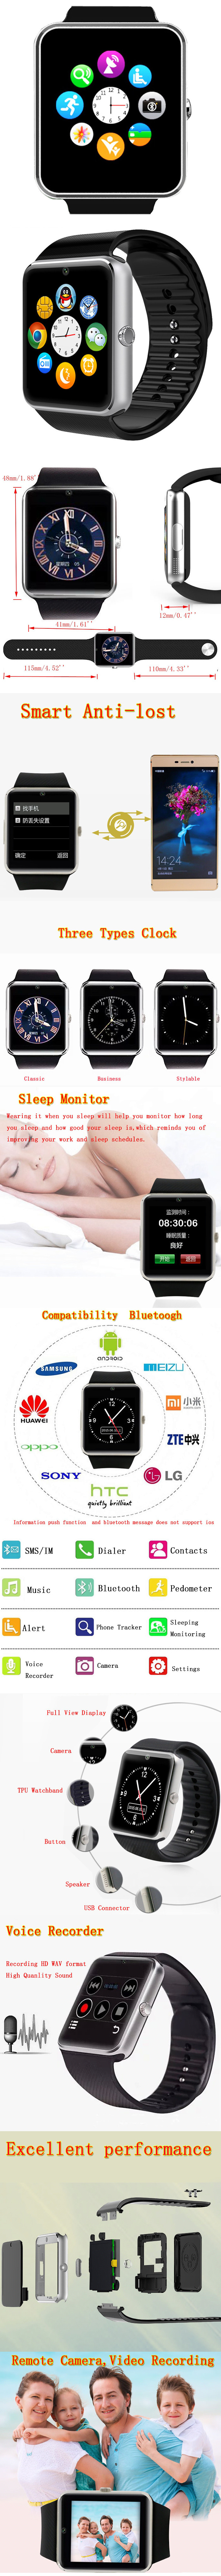 GT08-MTK6261-Bluetooth-Smart-Watch-Sync-Notifier-With-SIM-Card-for-Android-1048867